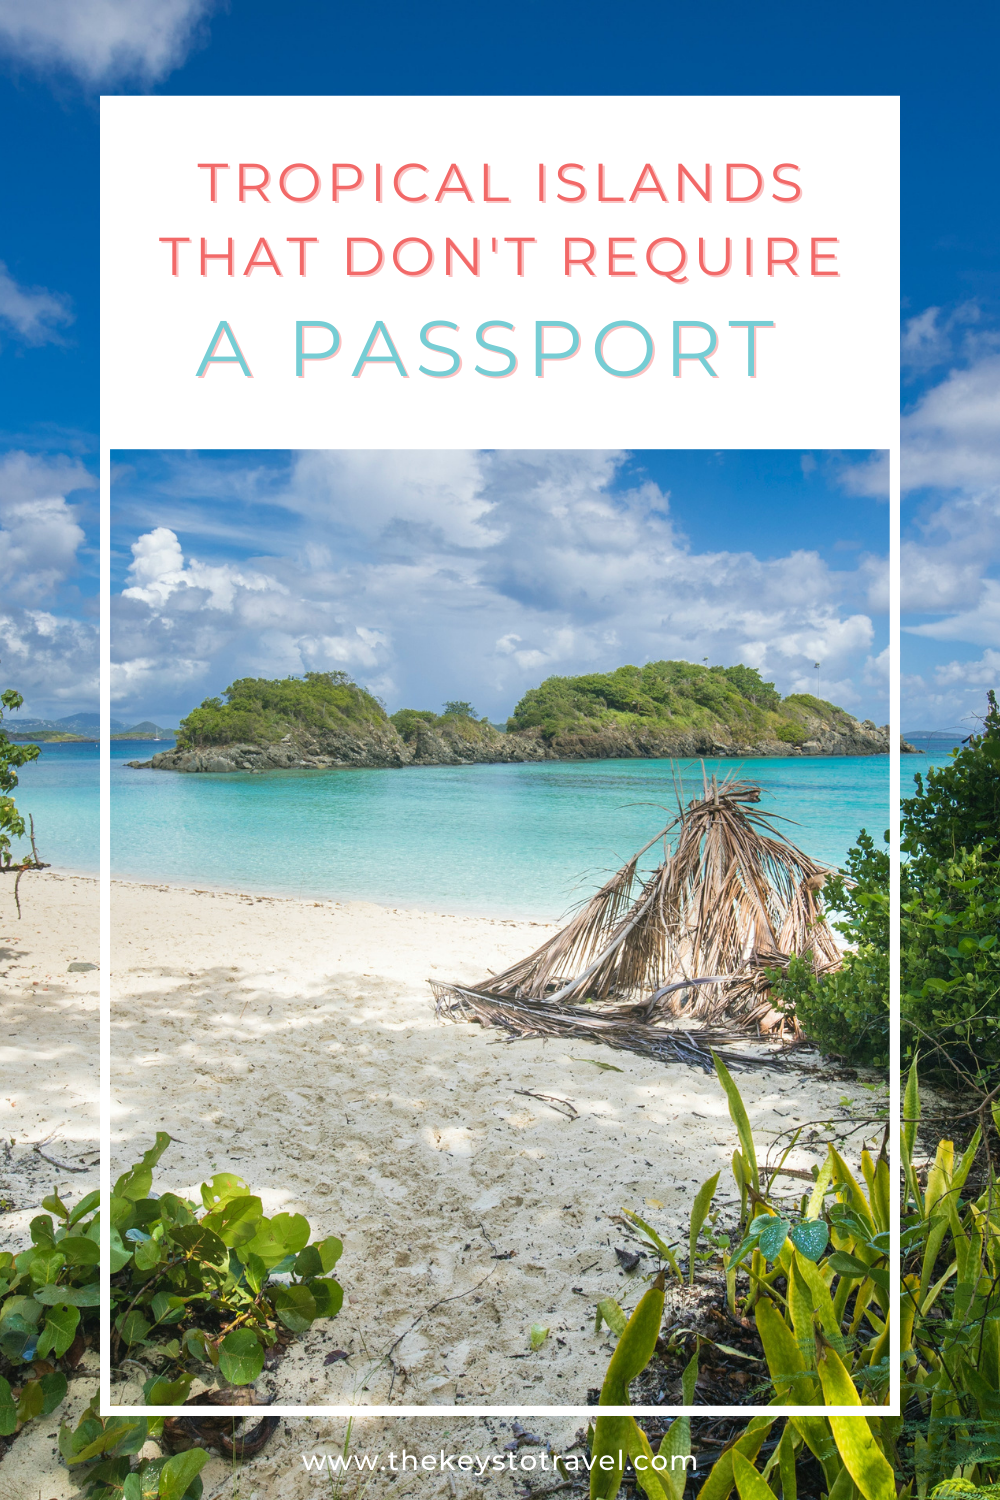 places you don't need a passport to travel